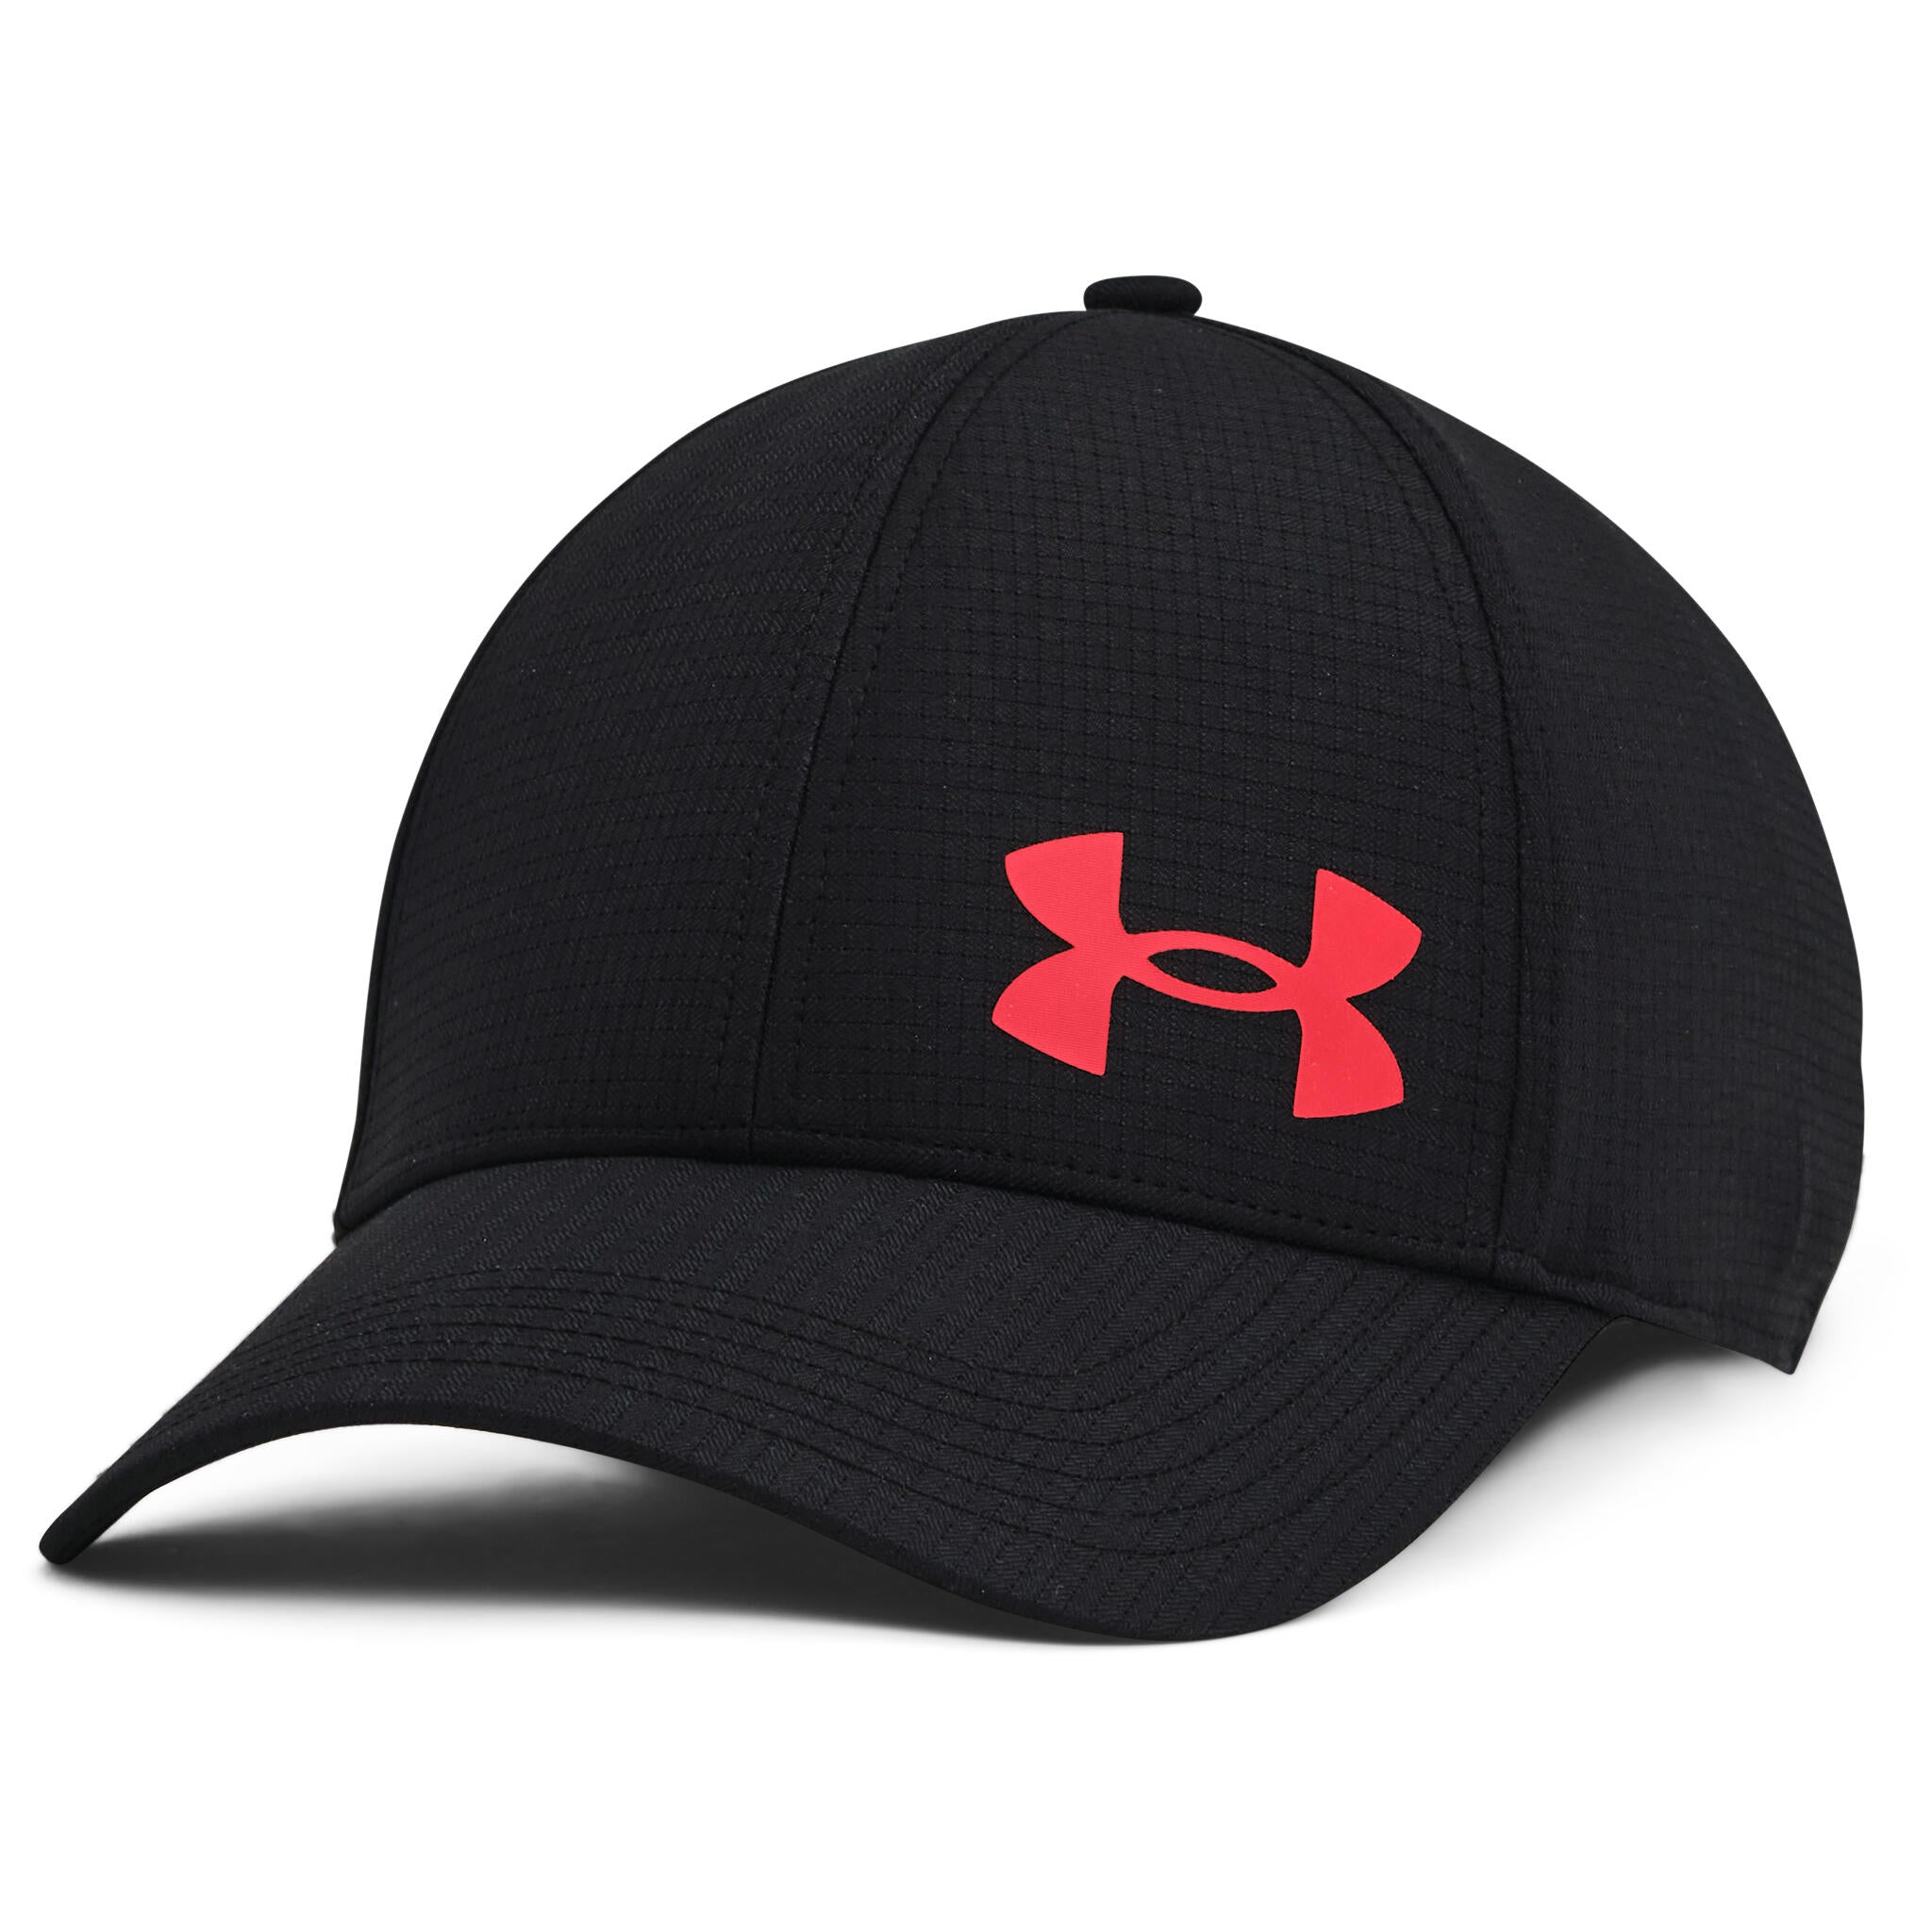 Under Armour Men's Iso-Chill Armourvent Trucker Hat - Brown, Osfm